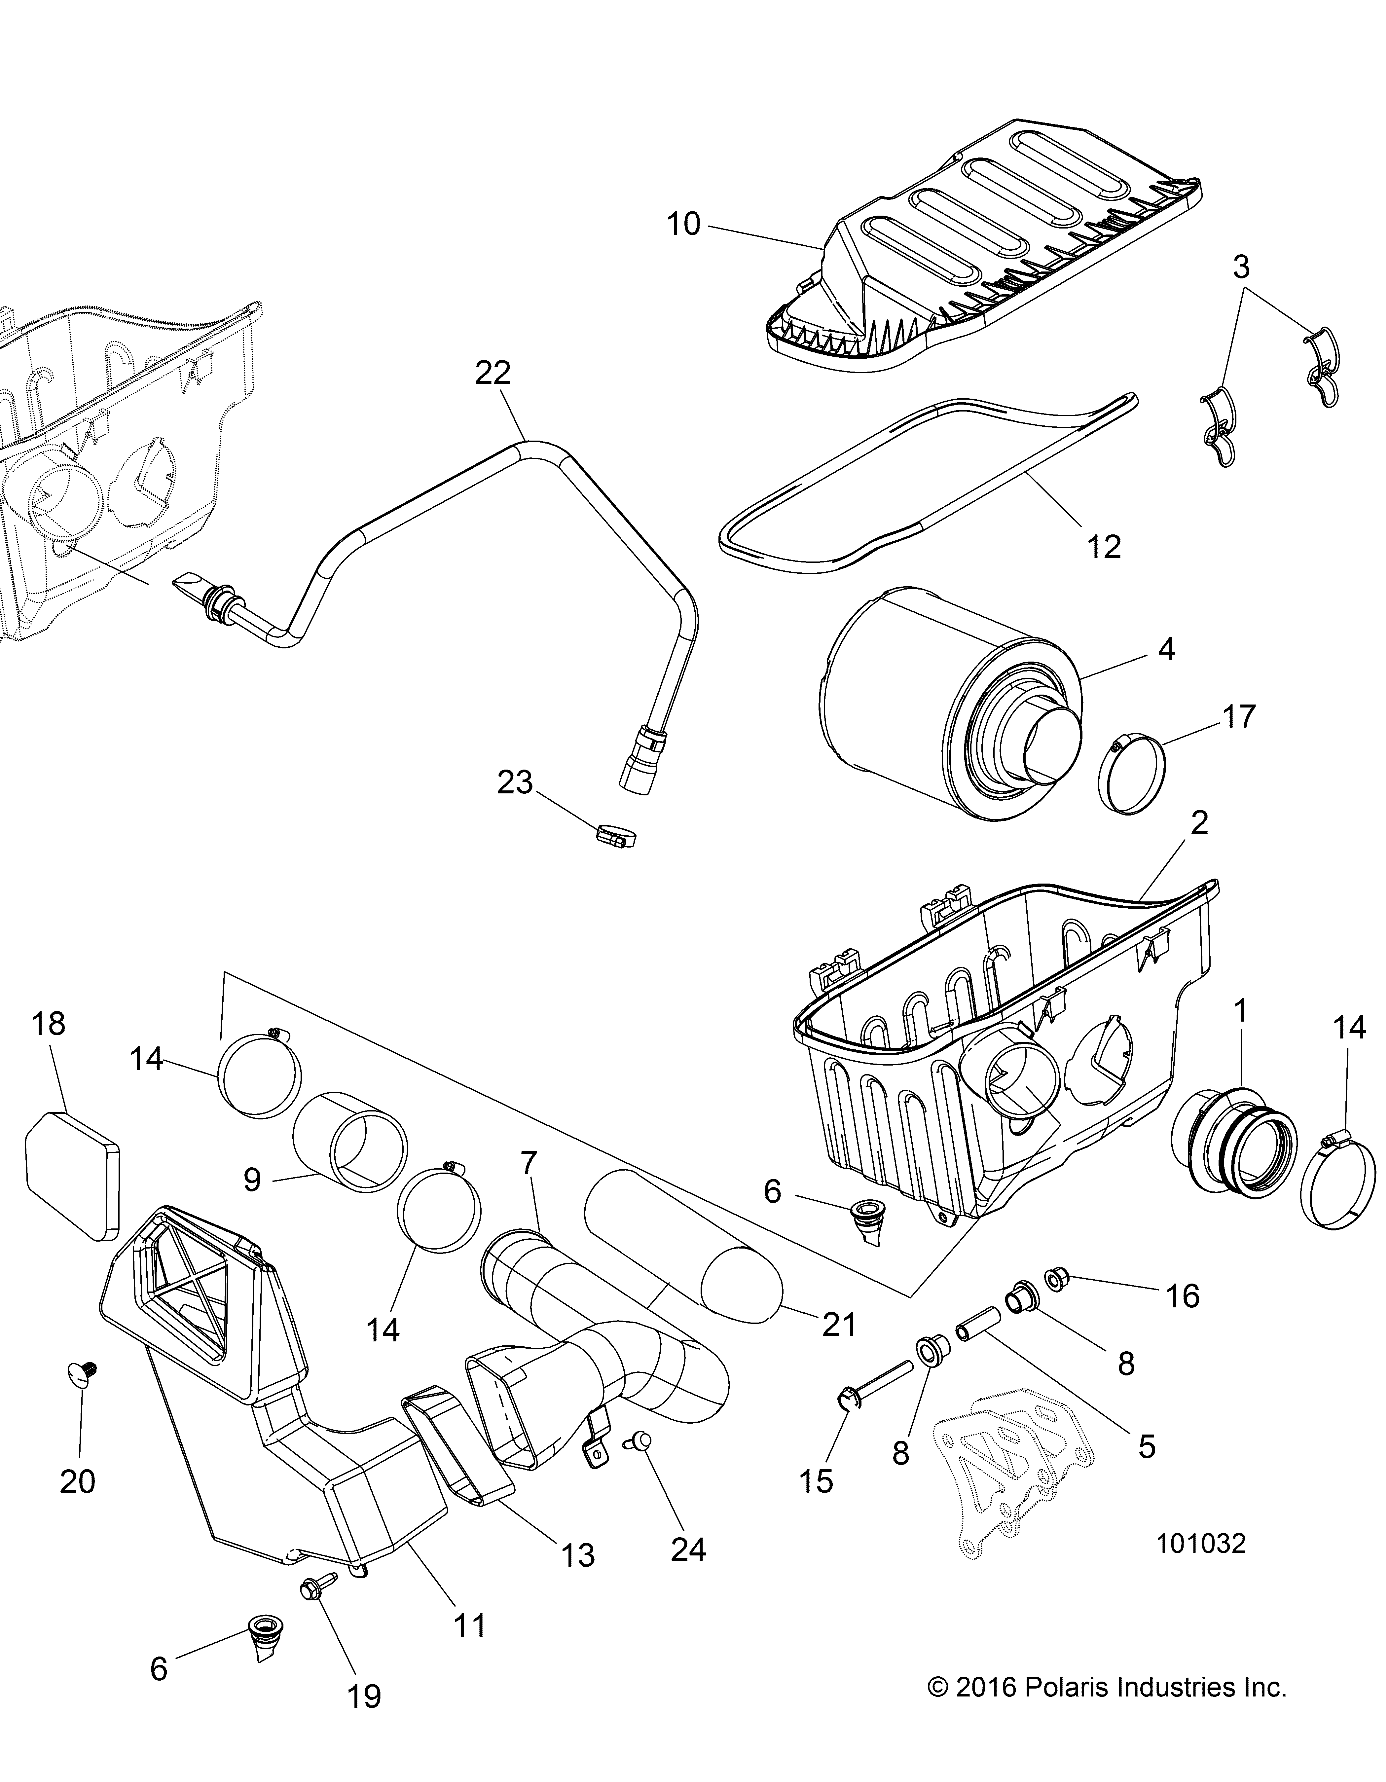 Part Number : 5415939 BOOT-ENGINE INTAKE